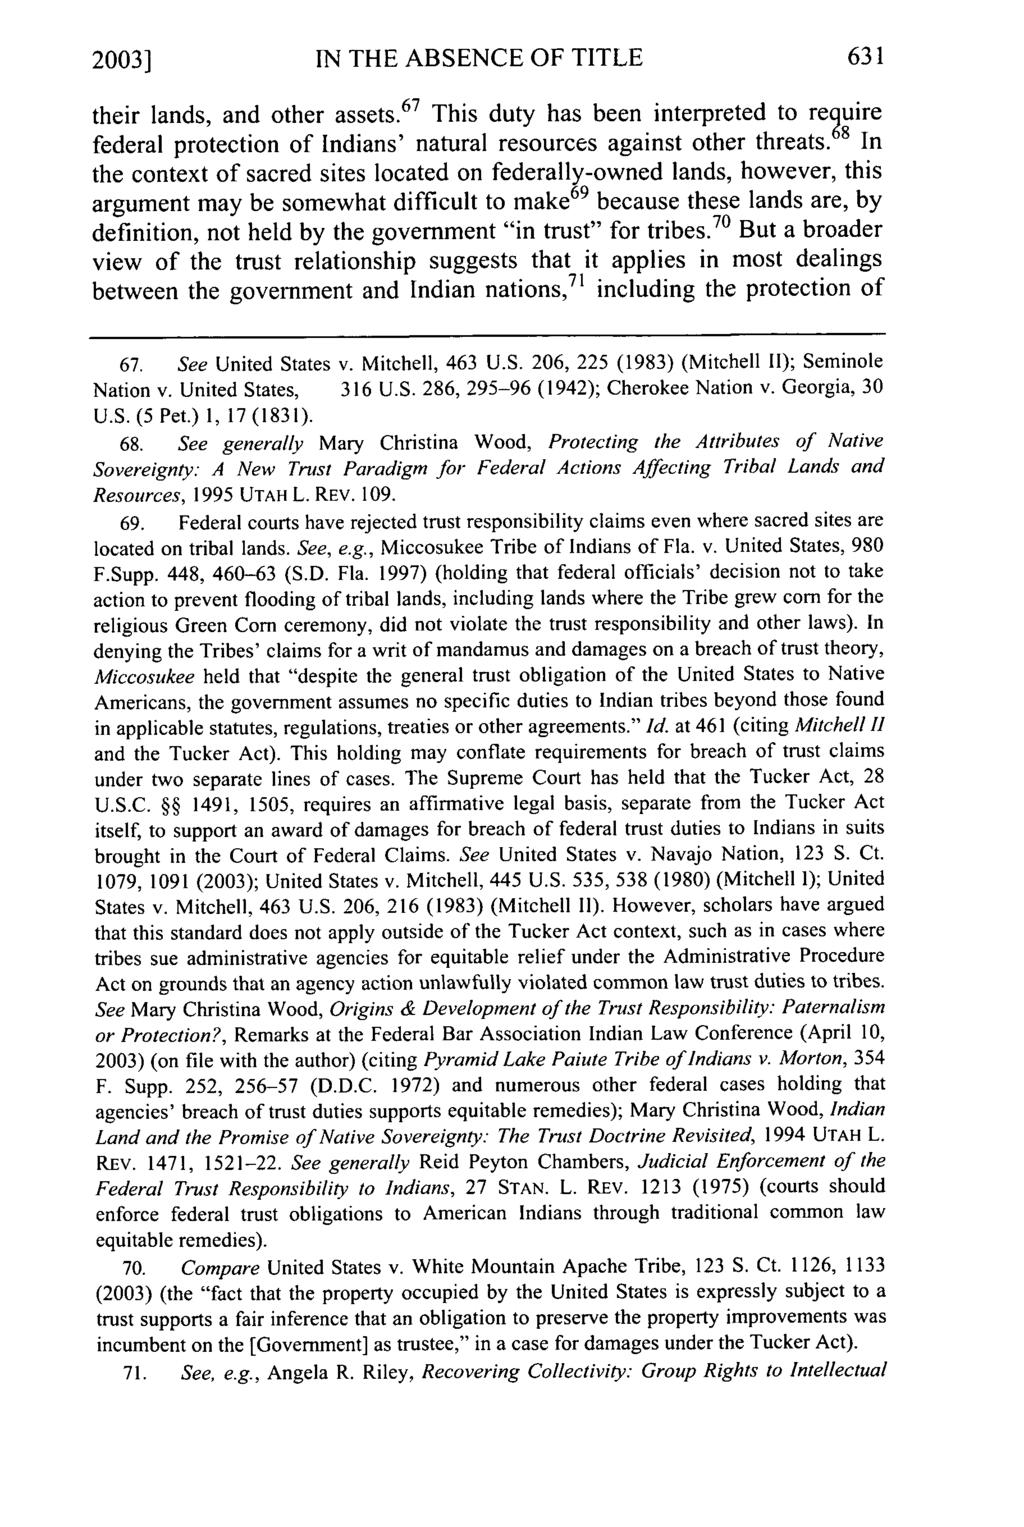 2003] IN THE ABSENCE OF TITLE their lands, and other assets. 67 This duty has been interpreted to reuire federal protection of Indians' natural resources against other threats.